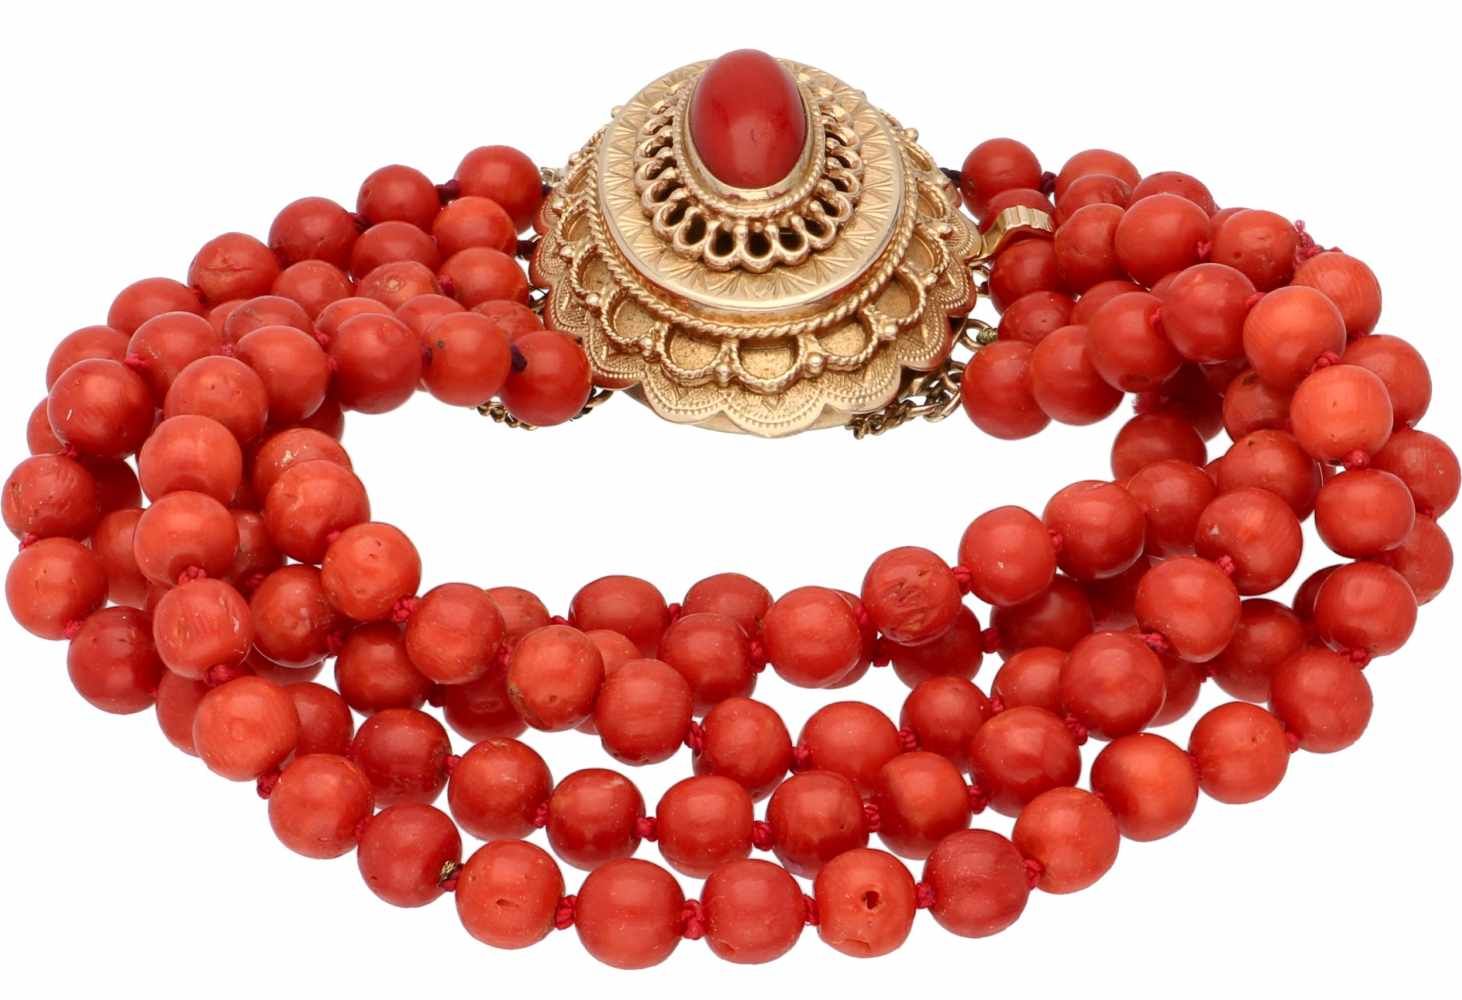 Bracelet with large yellow gold closure, red coral - 14 ct. - Image 2 of 2